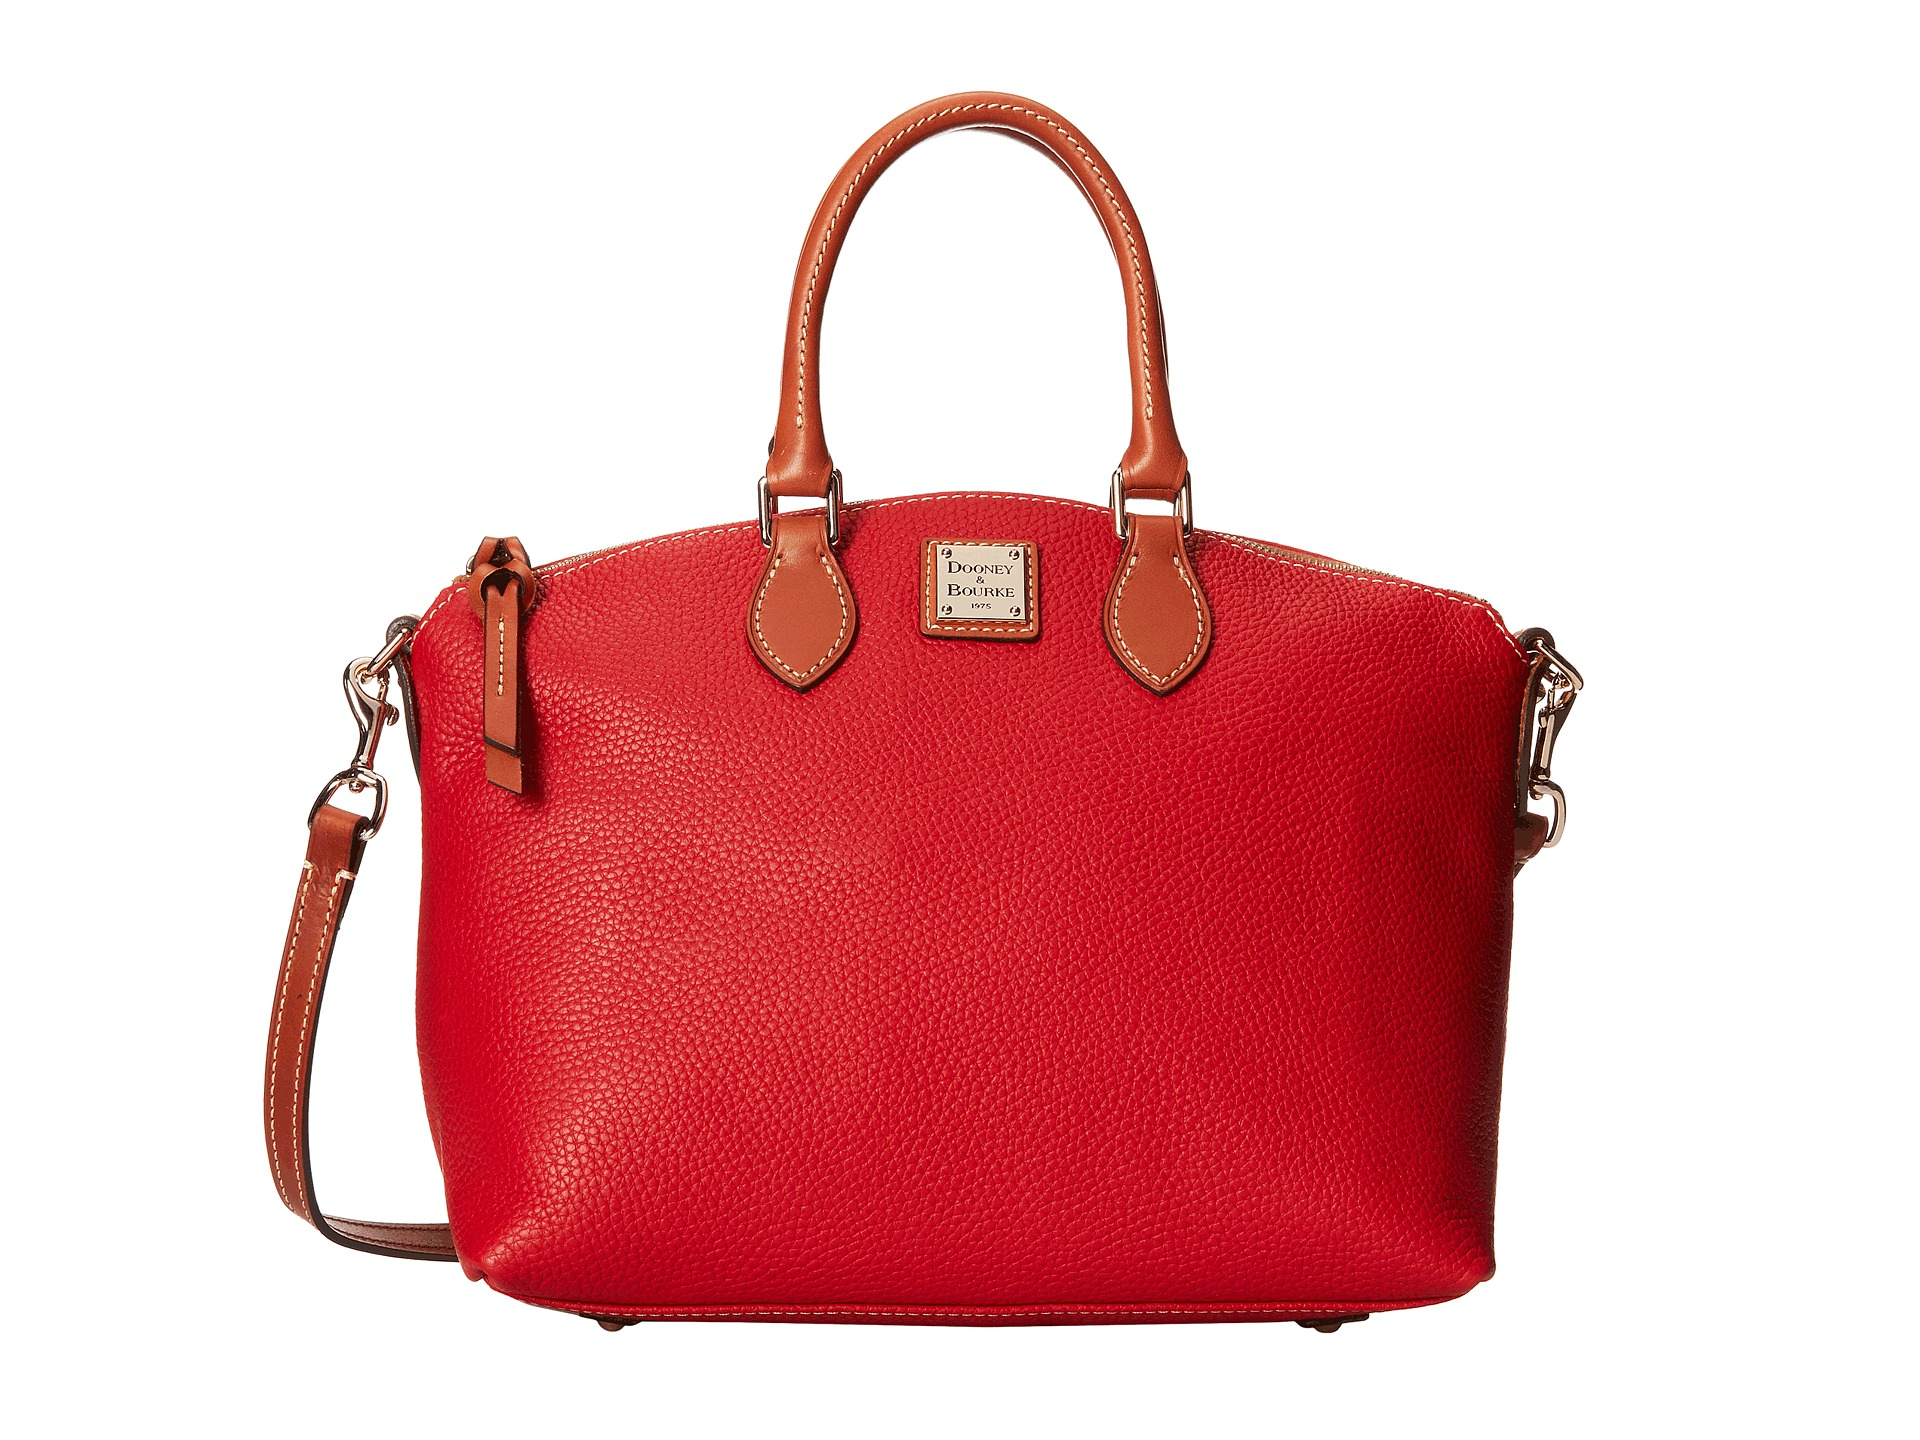 Dooney & bourke Pebble Leather Domed Satchel in Red | Lyst